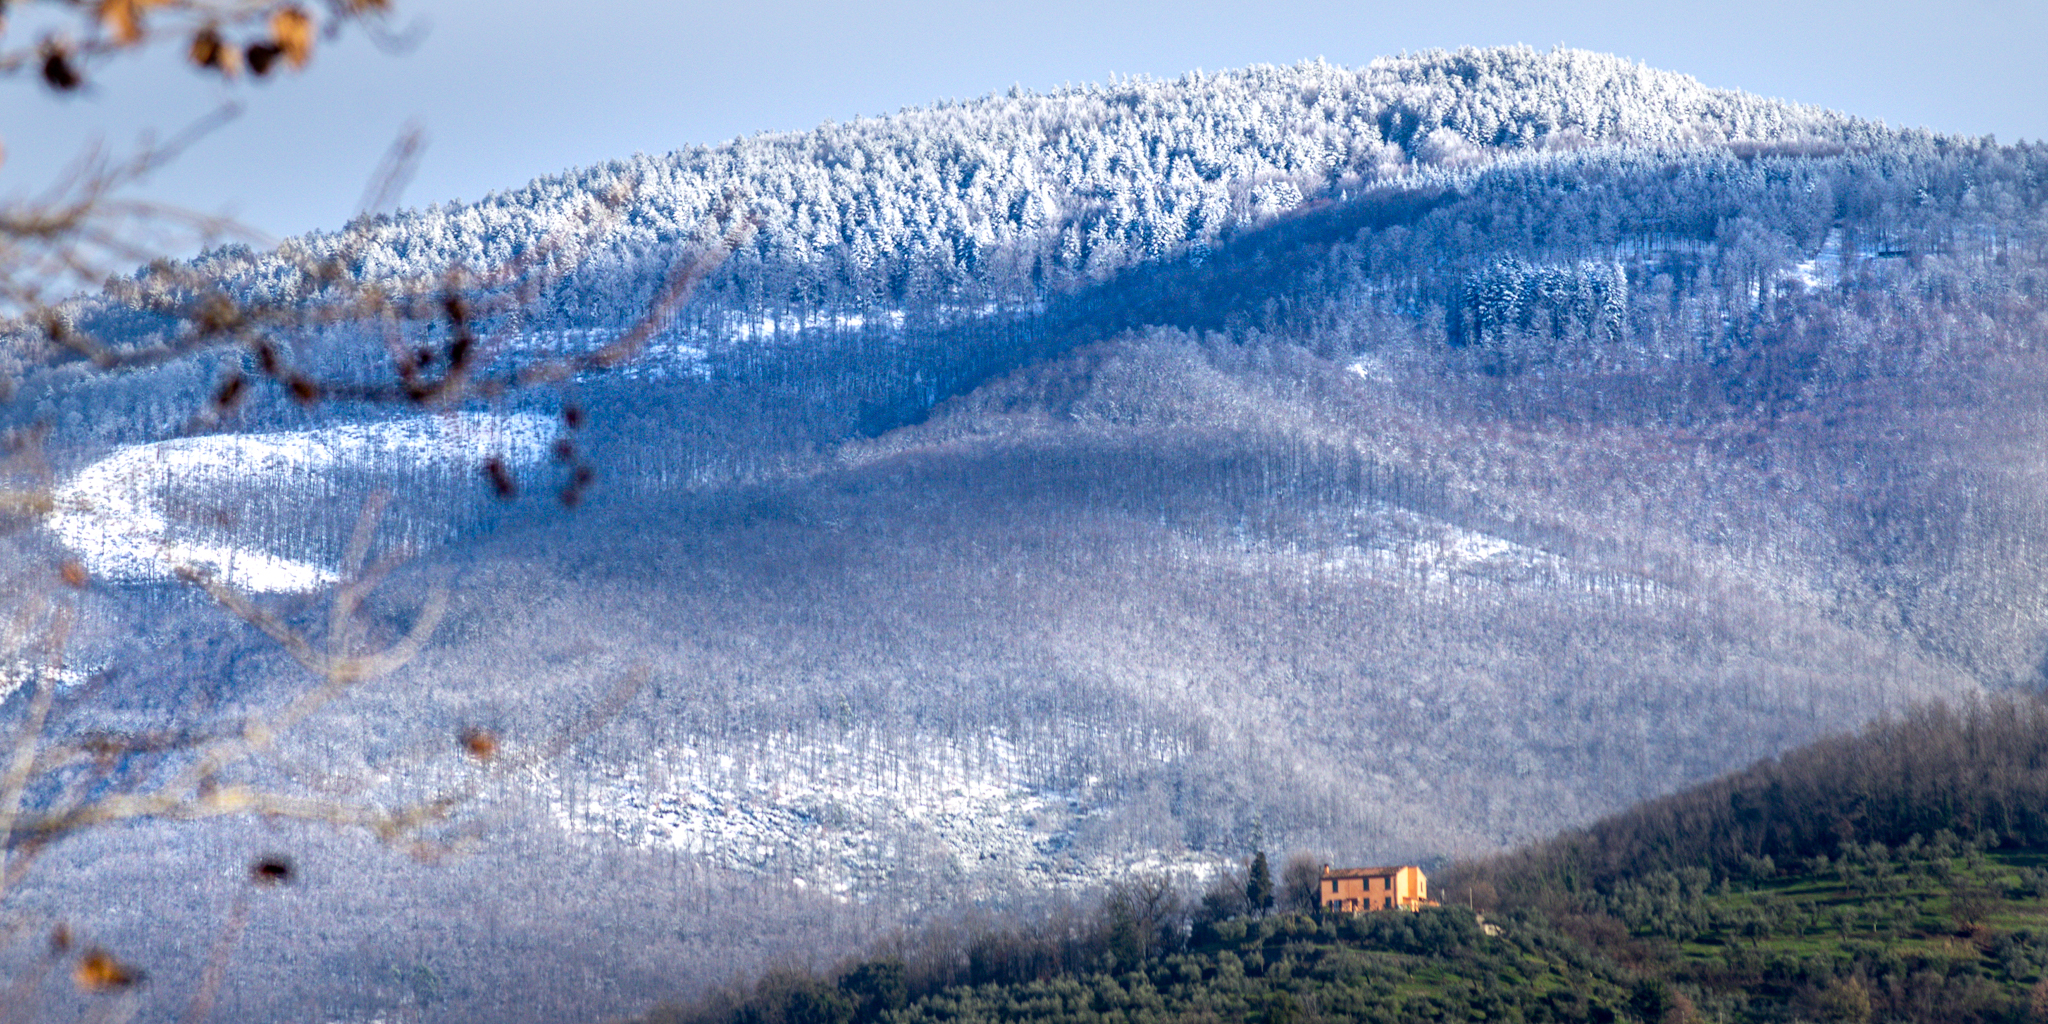 The first snow on the Pistoia mountains ...